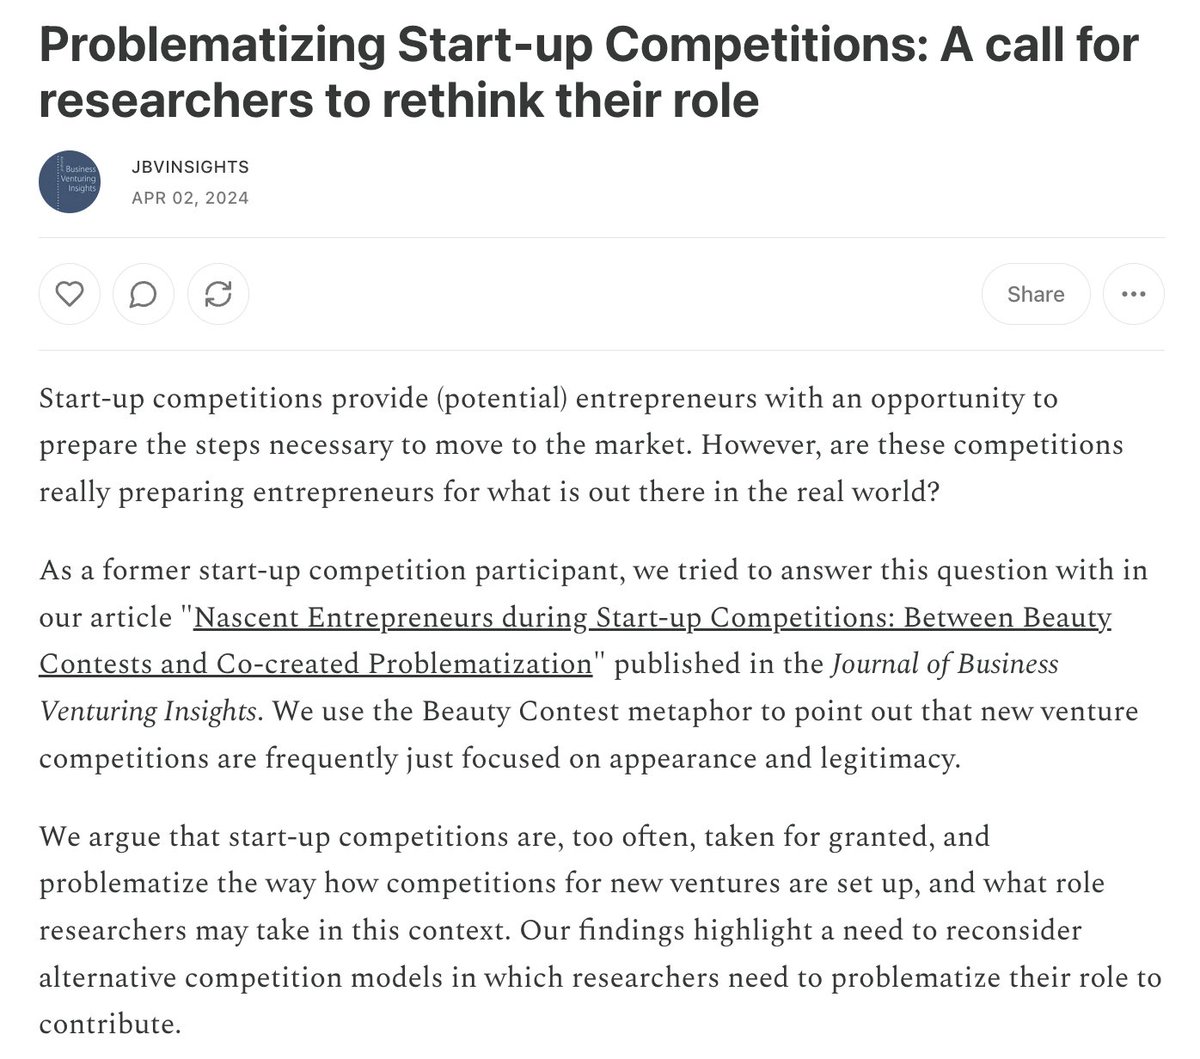 💡Latest on JBVI's Substack In this primer for practitioners, authors B. Bastian (@UniTrento) and A. Zucchella (@unipv) discuss alternative #startup competition models and the different roles researchers may take in such settings. 🔗: jbvinsights.substack.com/p/problematizi…